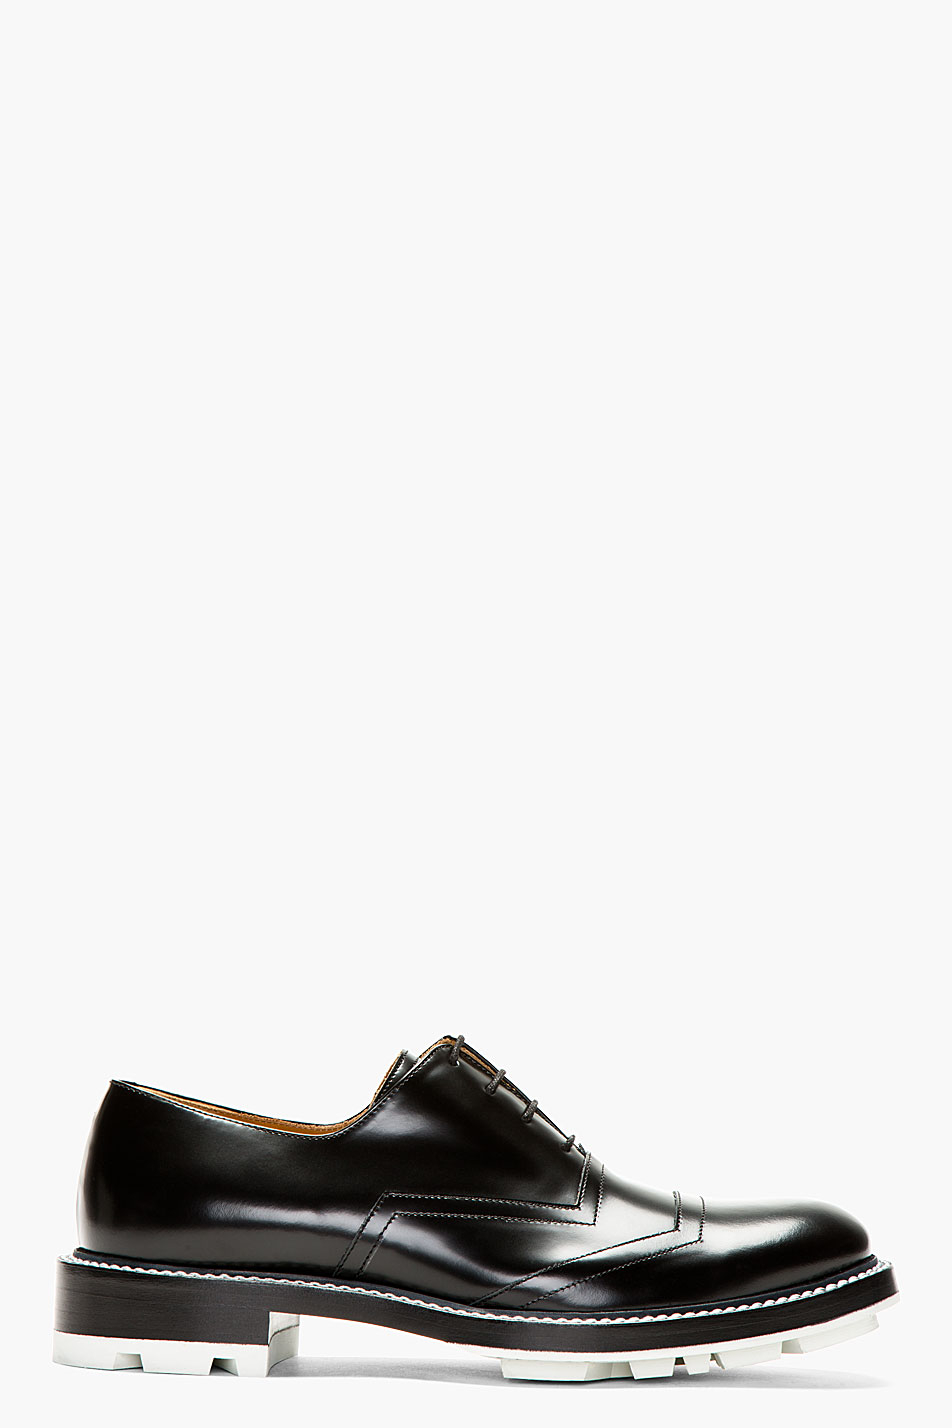 Jil Sander Black Buff Leather Lace Up Shoes in Black for